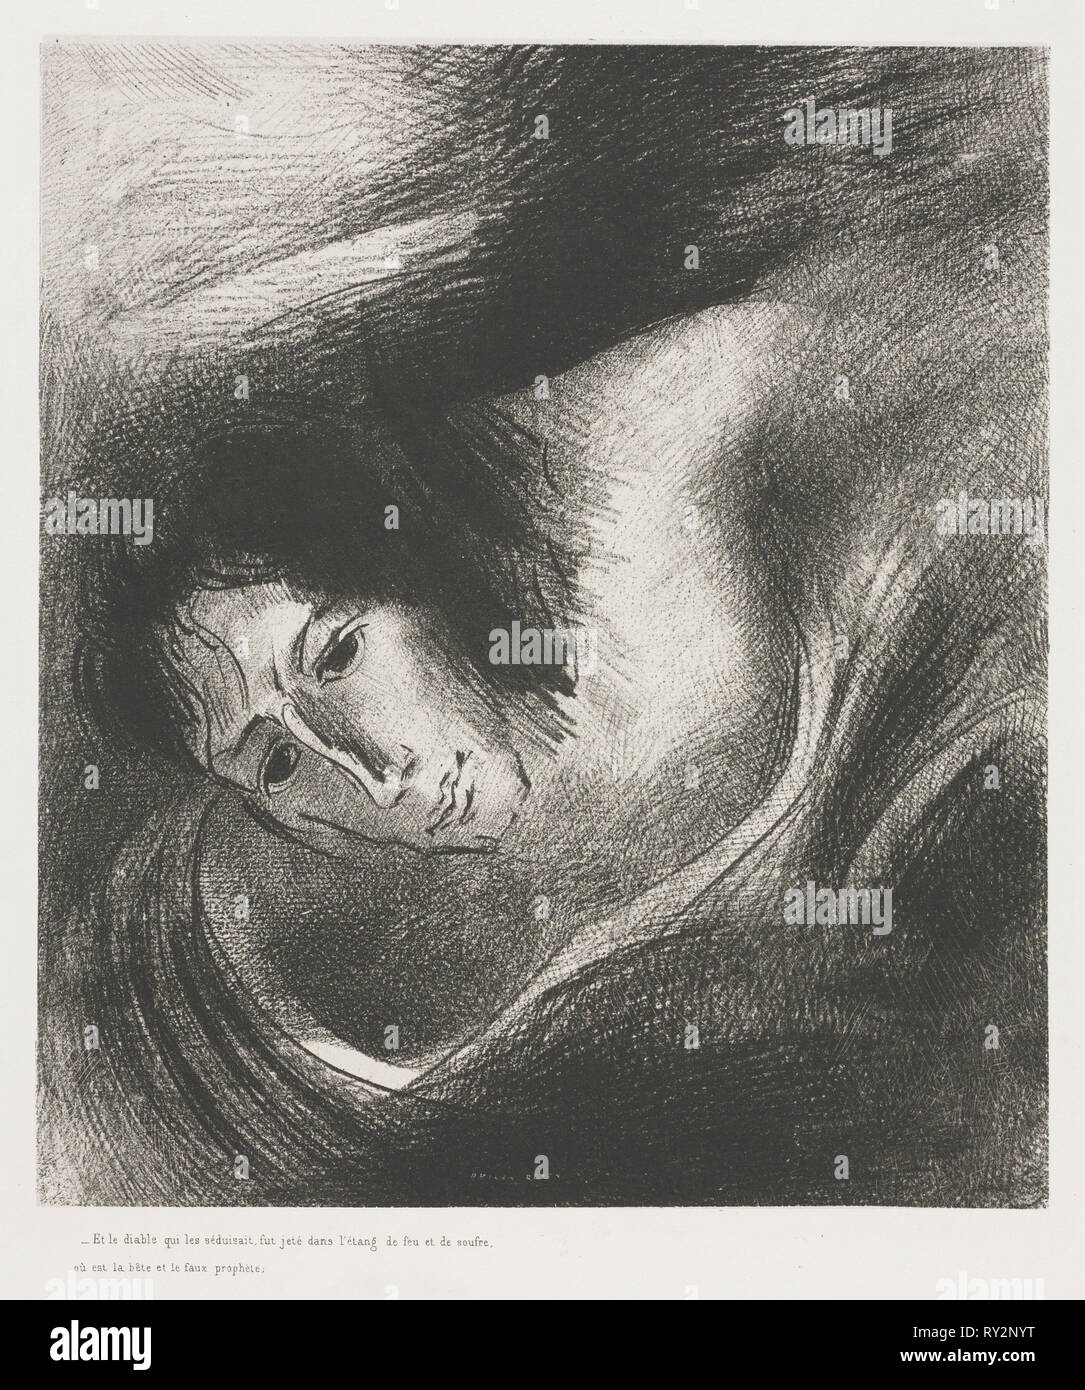 The Apocalypse of Saint John:  And the Devil that deceived them was cast into the Lake of Fire and Brimstone where is the Beast and the false Prophet, 1899. Odilon Redon (French, 1840-1916). Lithograph Stock Photo